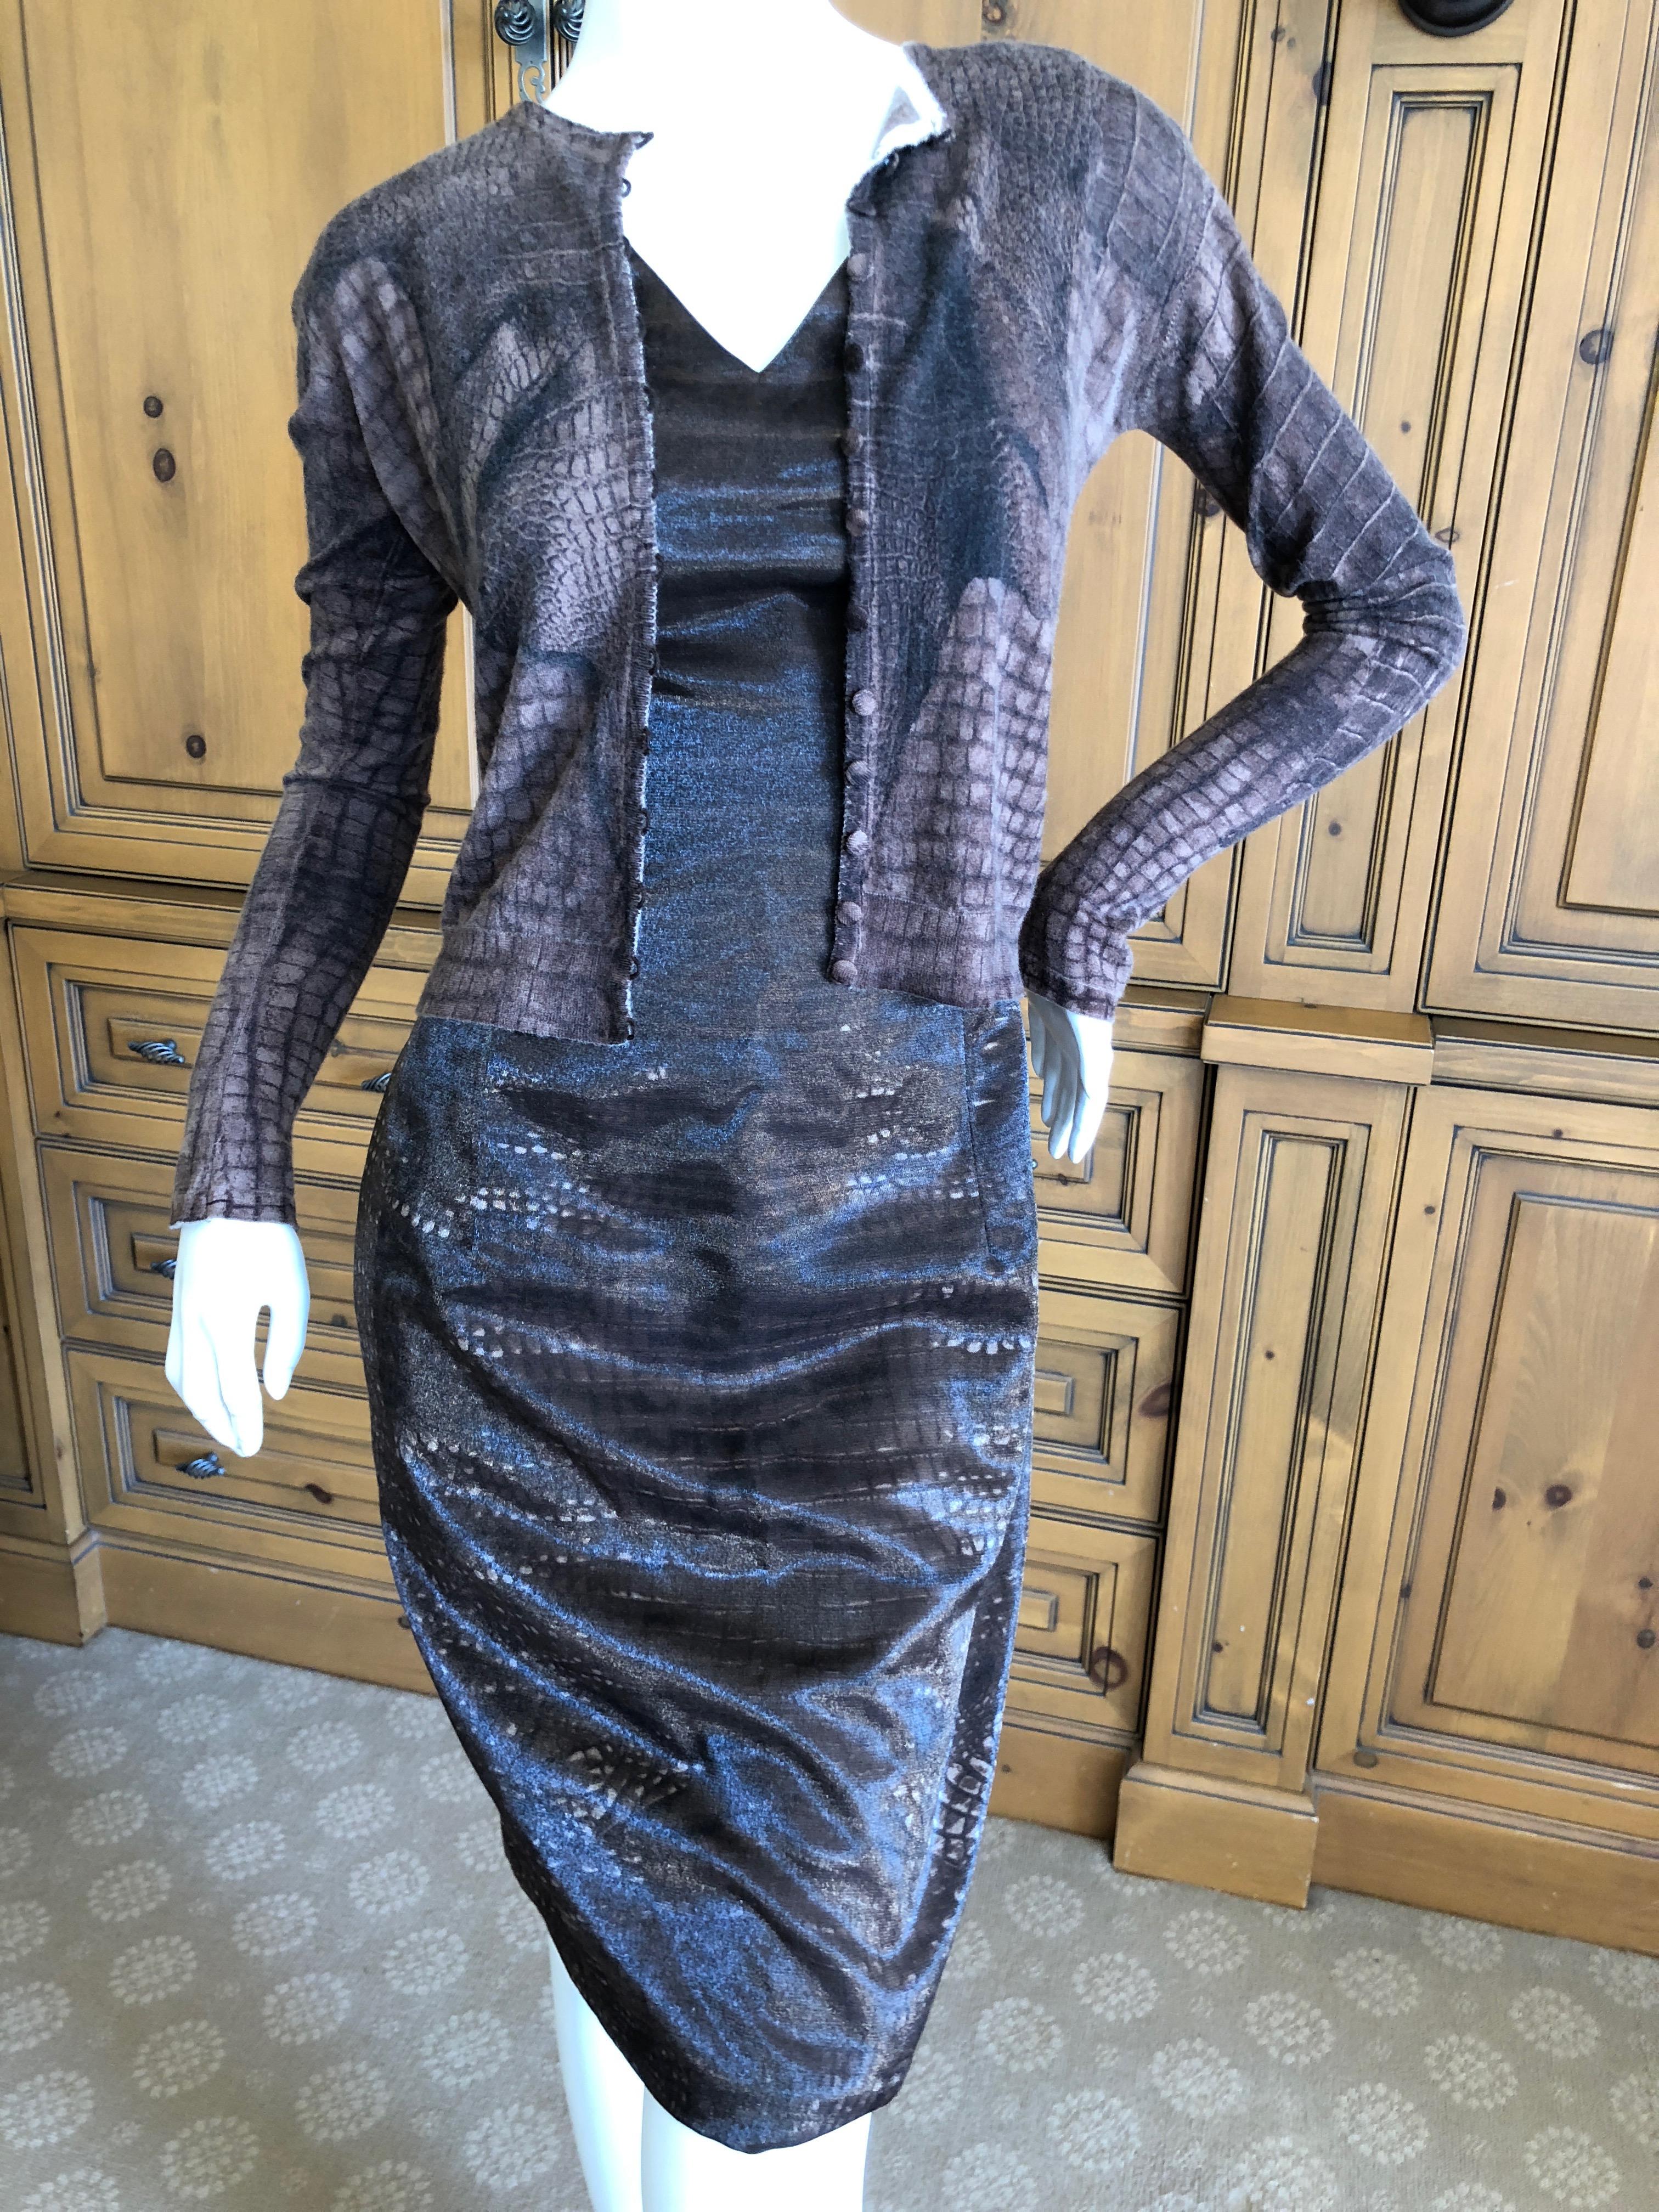 John Galliano 1990's Alligator Print Jacquard Dress w Matching Cashmere Sweater .
The sweater is pure cashmere, the skirt is acetate.
This is so beautiful, please see all the photos.
Purchased together to fit the original owner, the  dress is marked